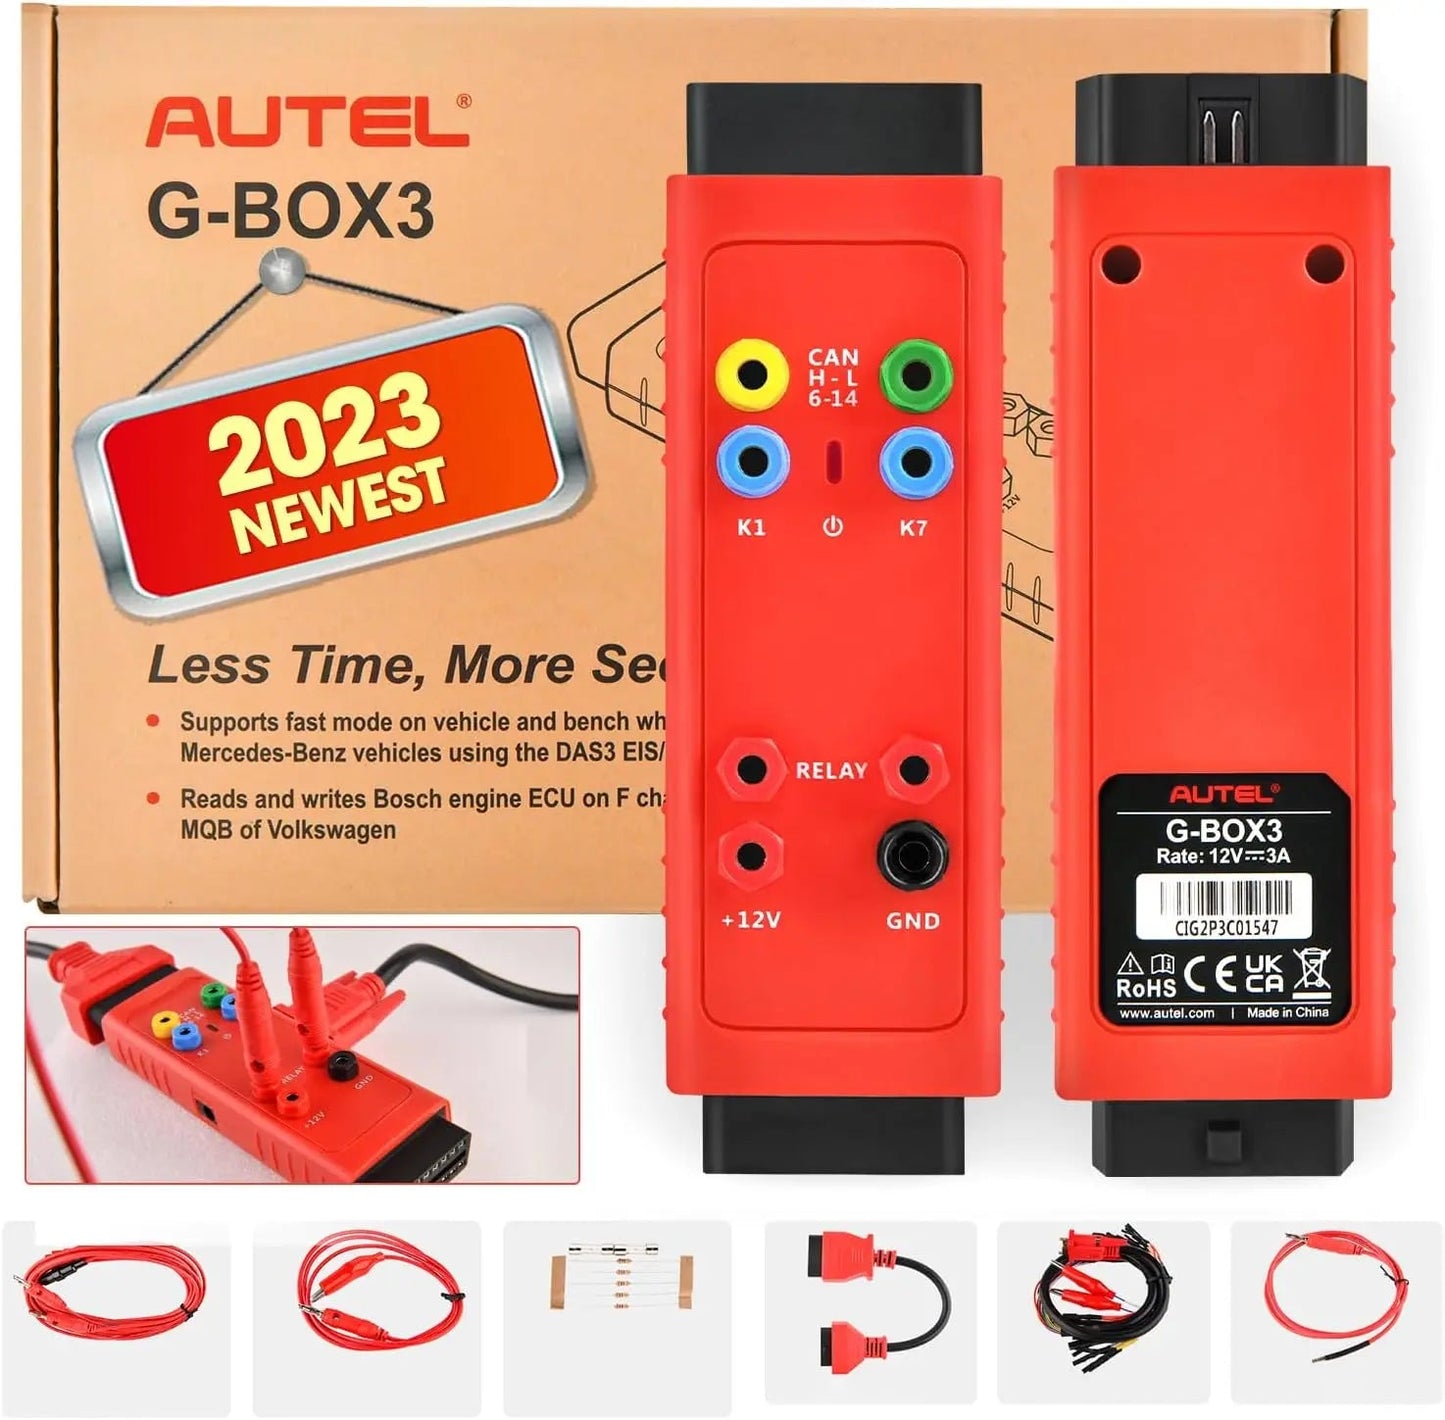 Autel G-BOX3 Accessory Tool Upgraded of Gbox2 Key Programming Adapter for Mercedes-Benz for BMW Writing Boot Mode Bench Method - Dynamex